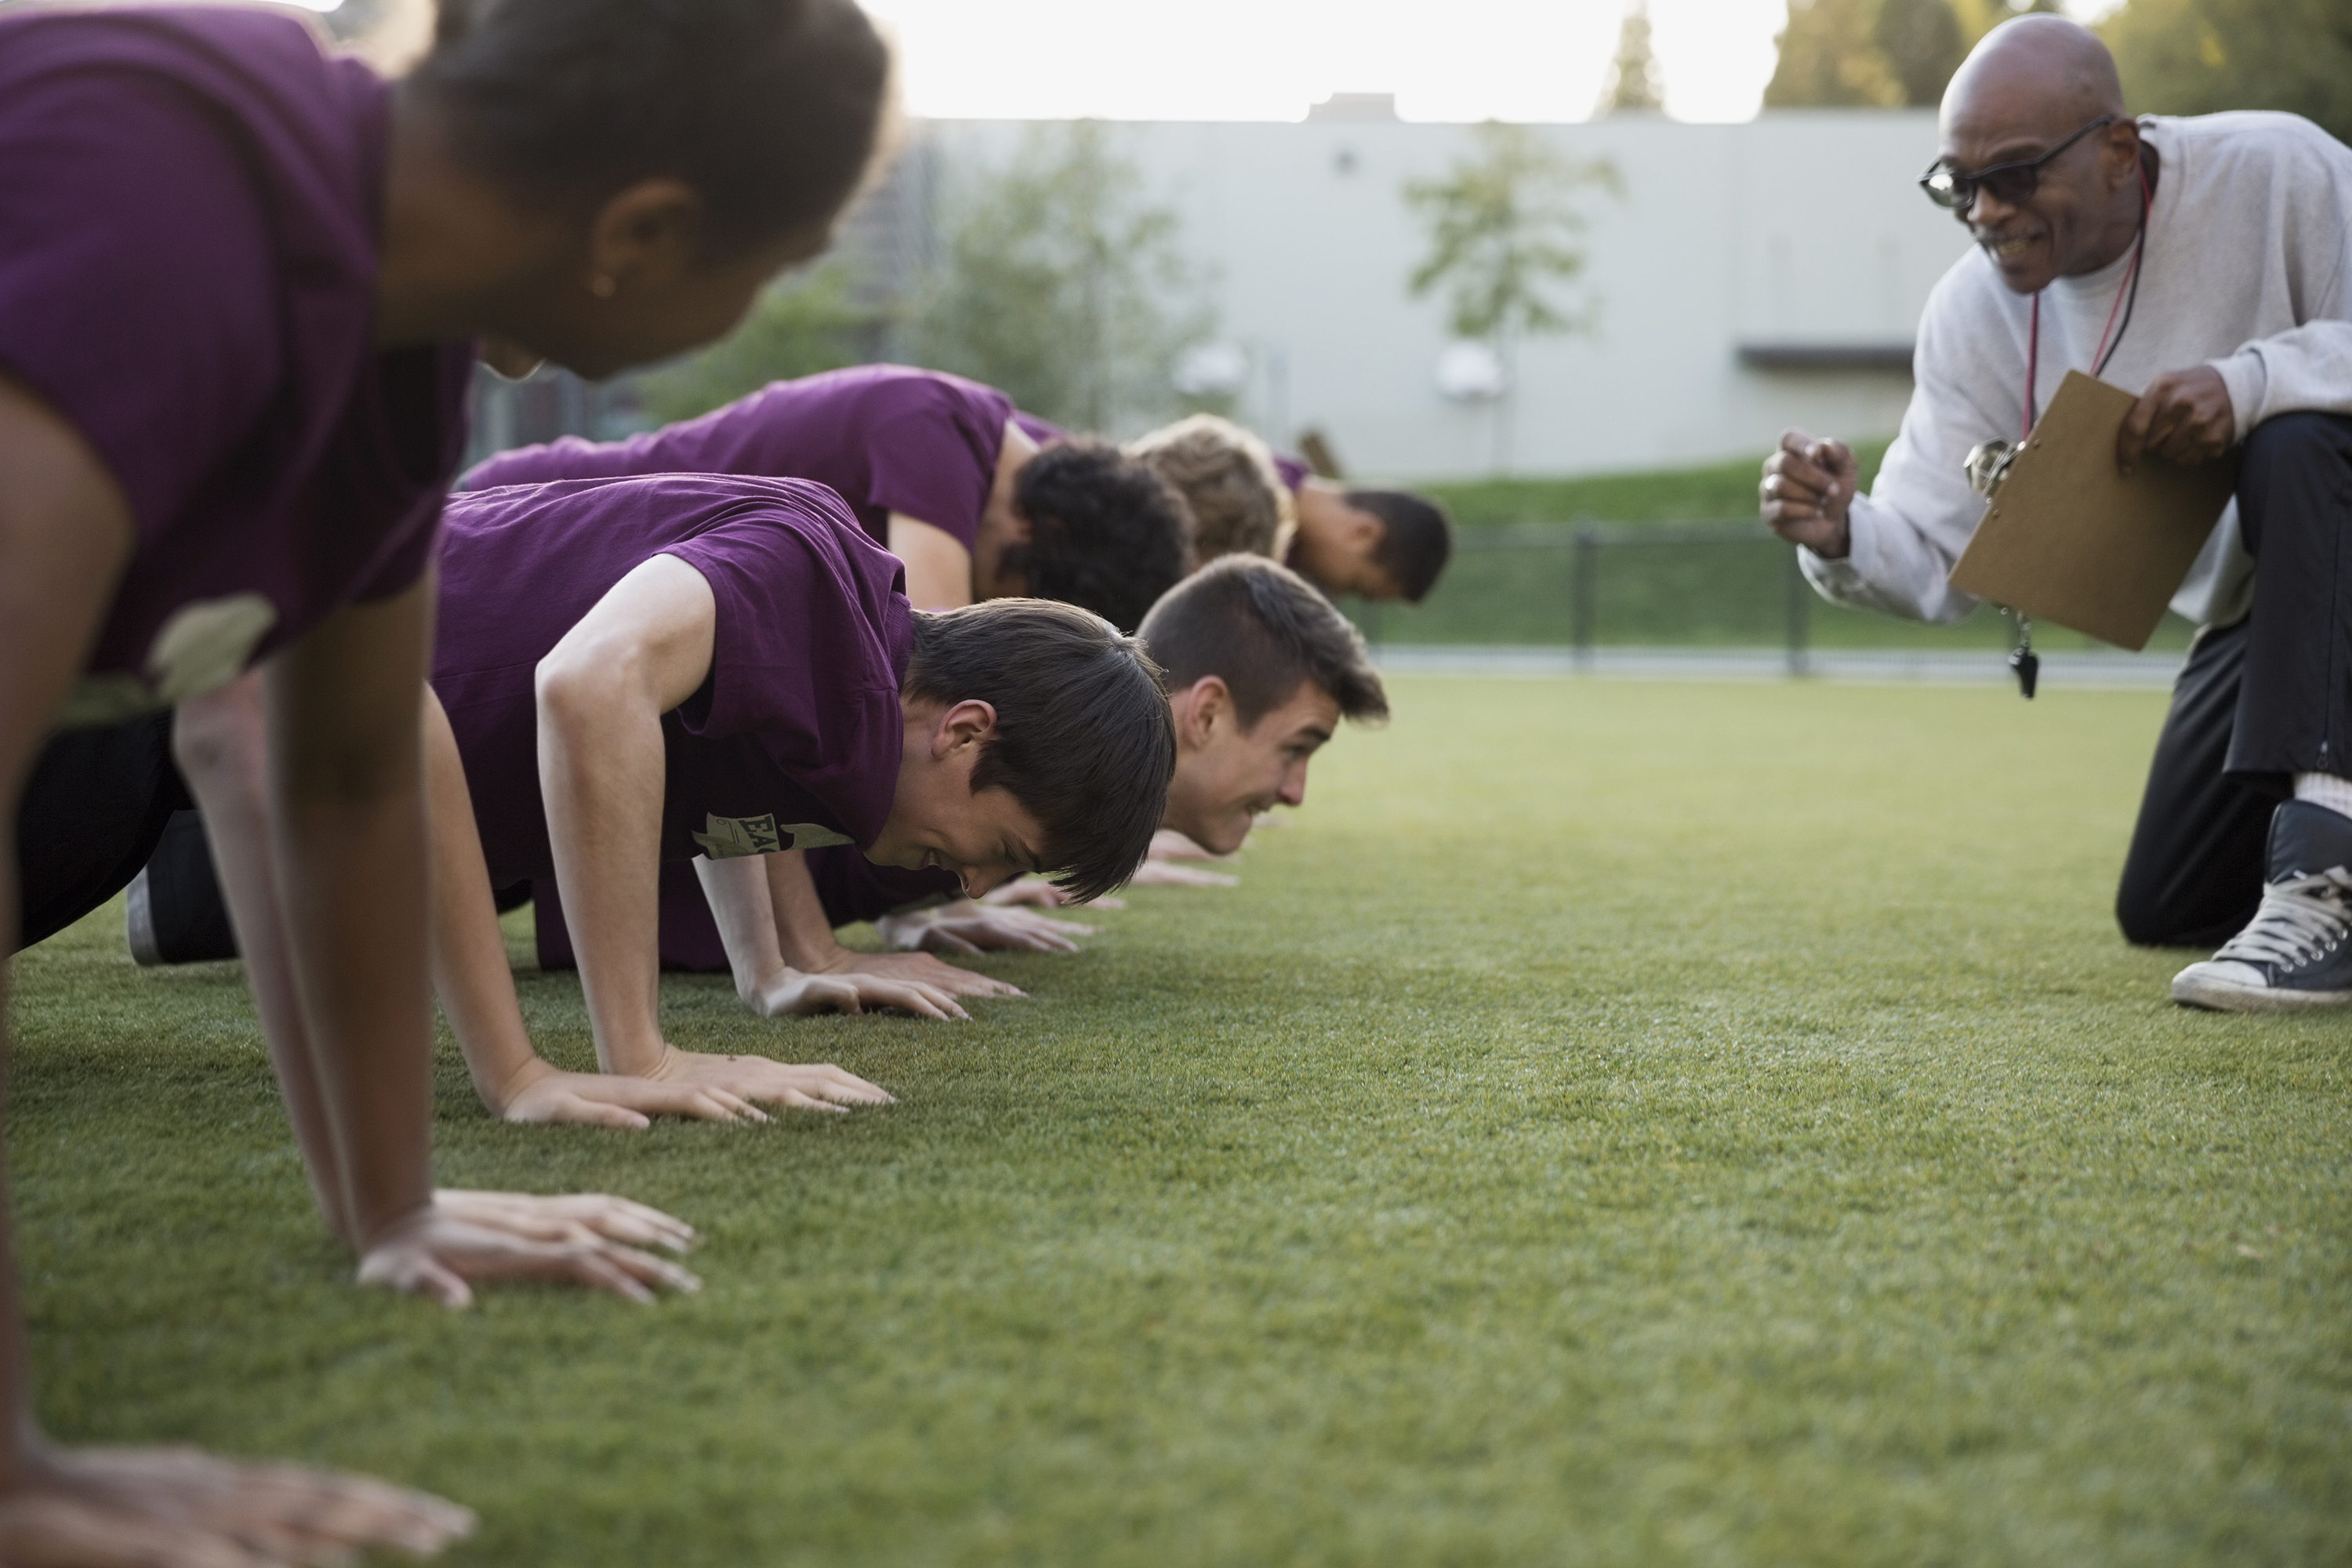 Physical education teacher encouraging students doing push-ups. (Hero Images via Getty Images)